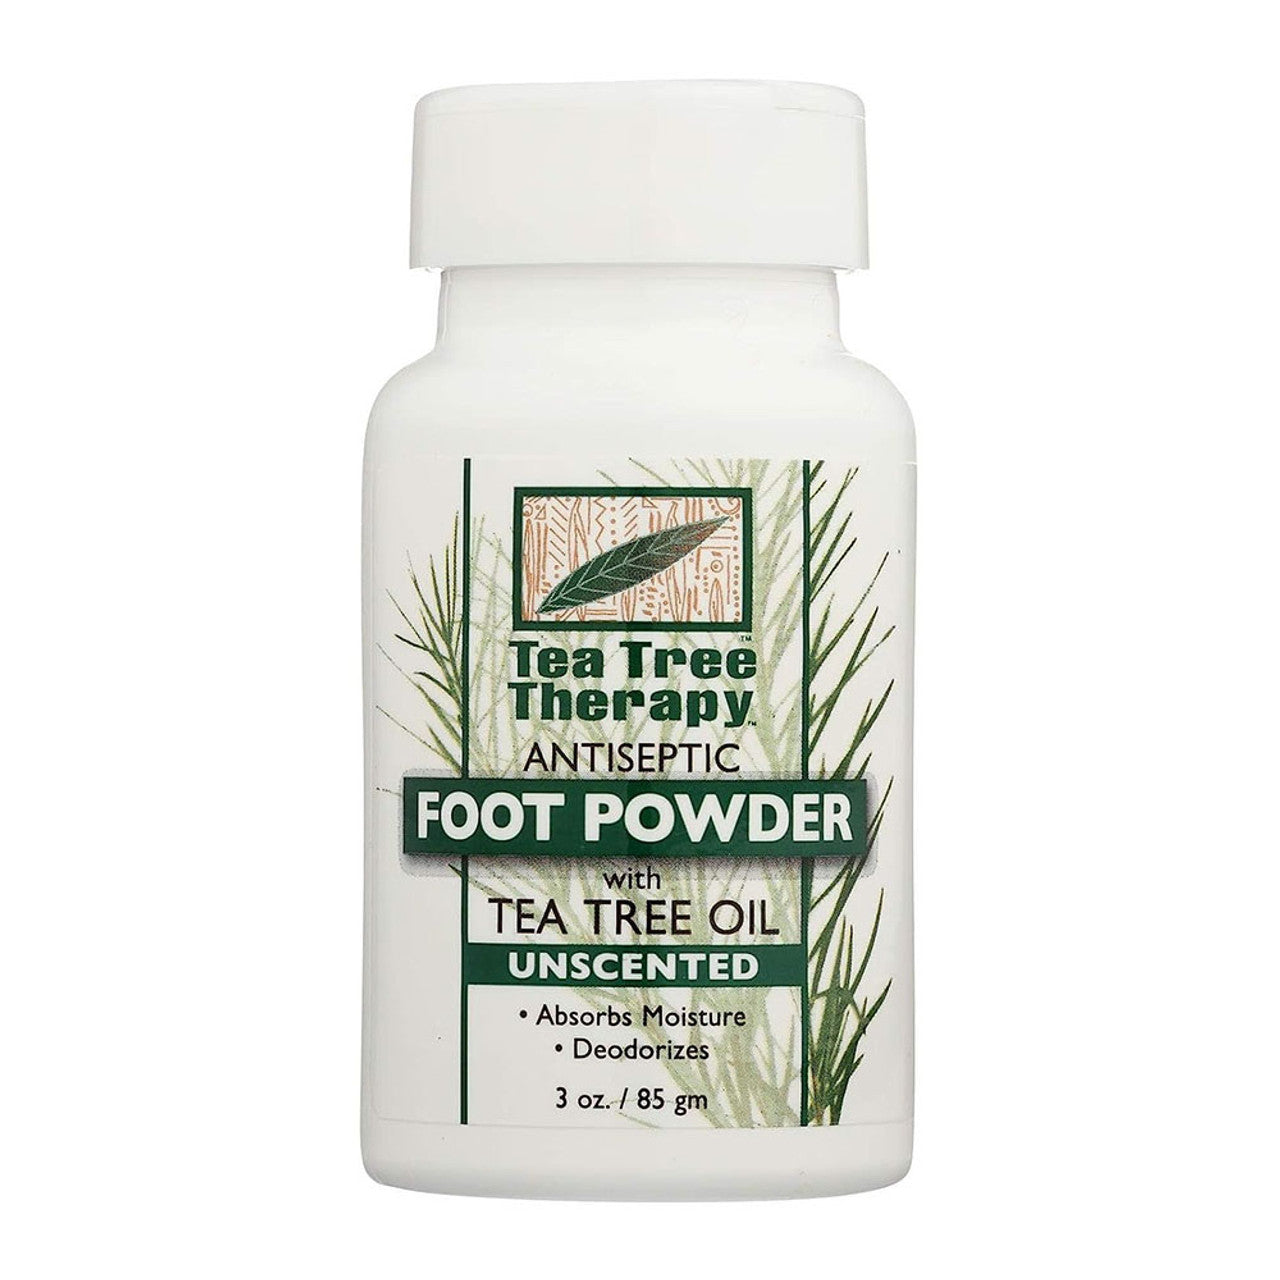 Tea Tree Therapy Antiseptic Foot Powder with Tea Tree Oil, Unscented, 3 Oz